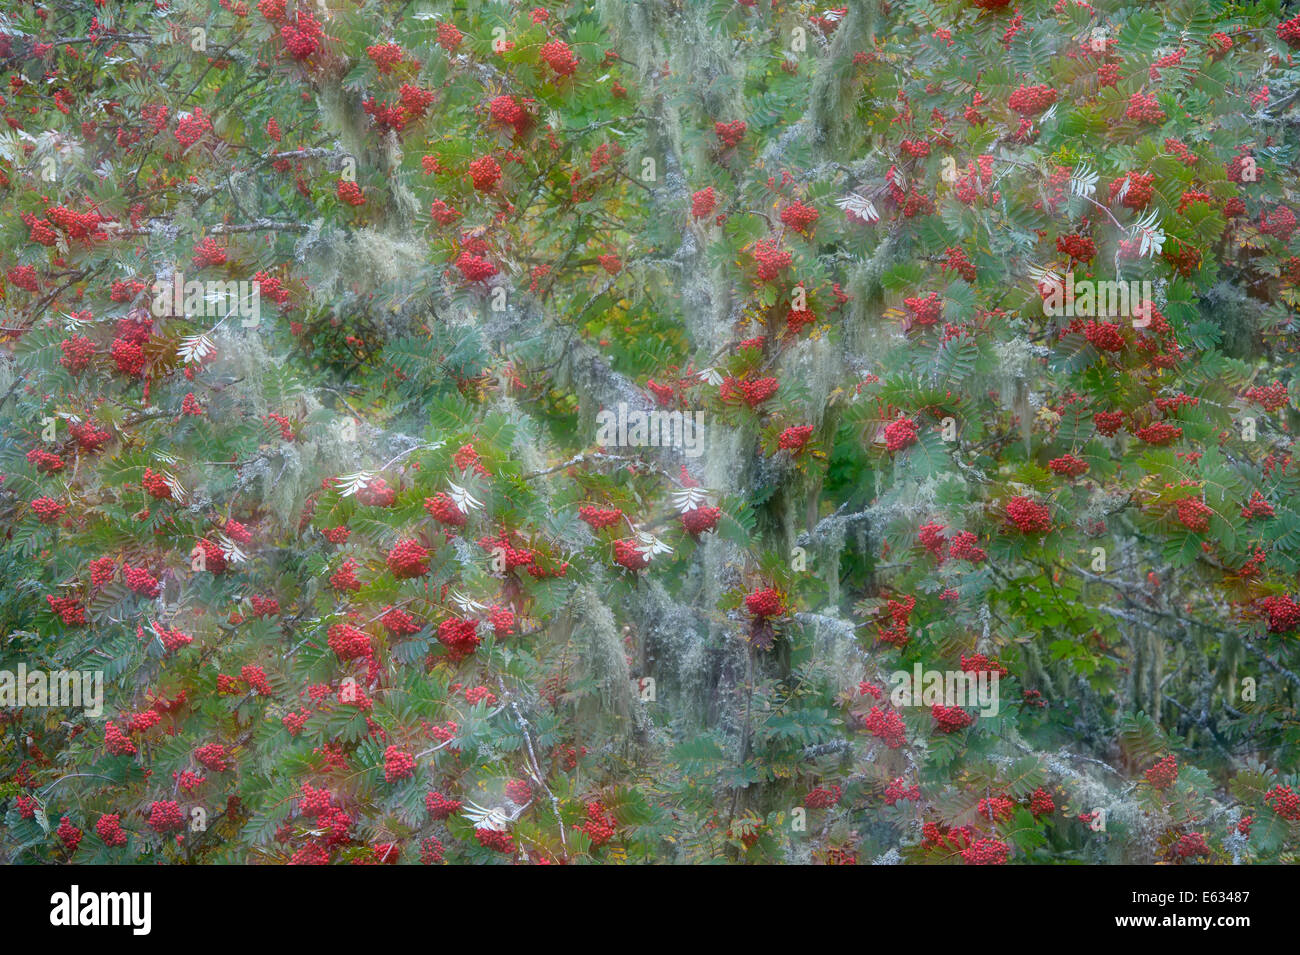 European Rowan ( Sorbus aucuparia ) tree with red berries during autumn in French alps with a double exposure in camera. Stock Photo